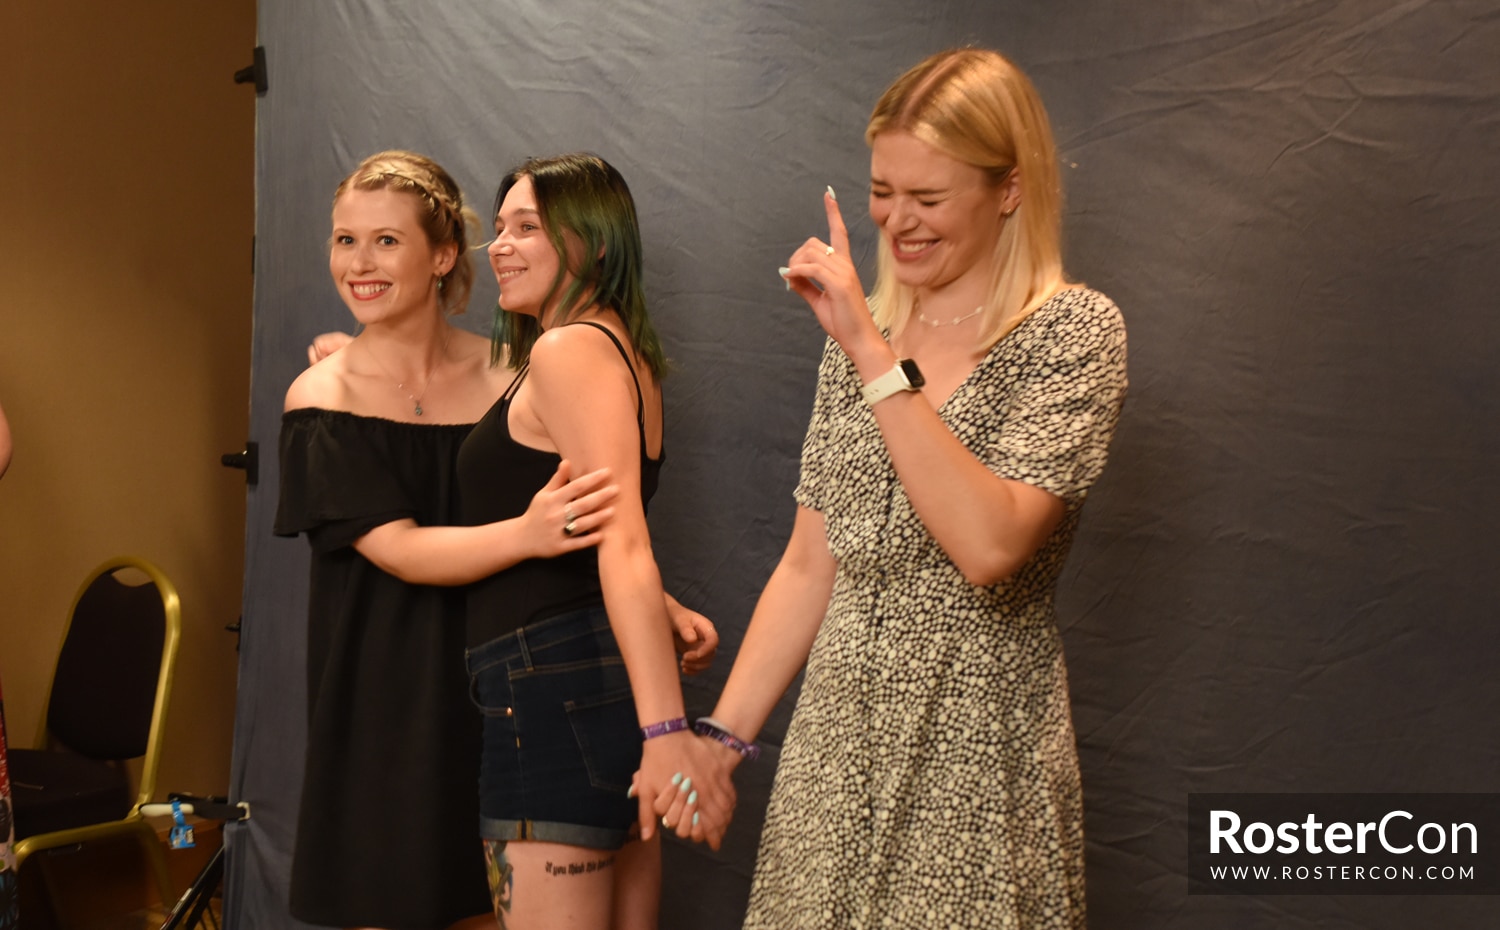 Tiera Skovbye & Rose Reynolds - The Happy Ending Convention 3 - Once Upon A Time